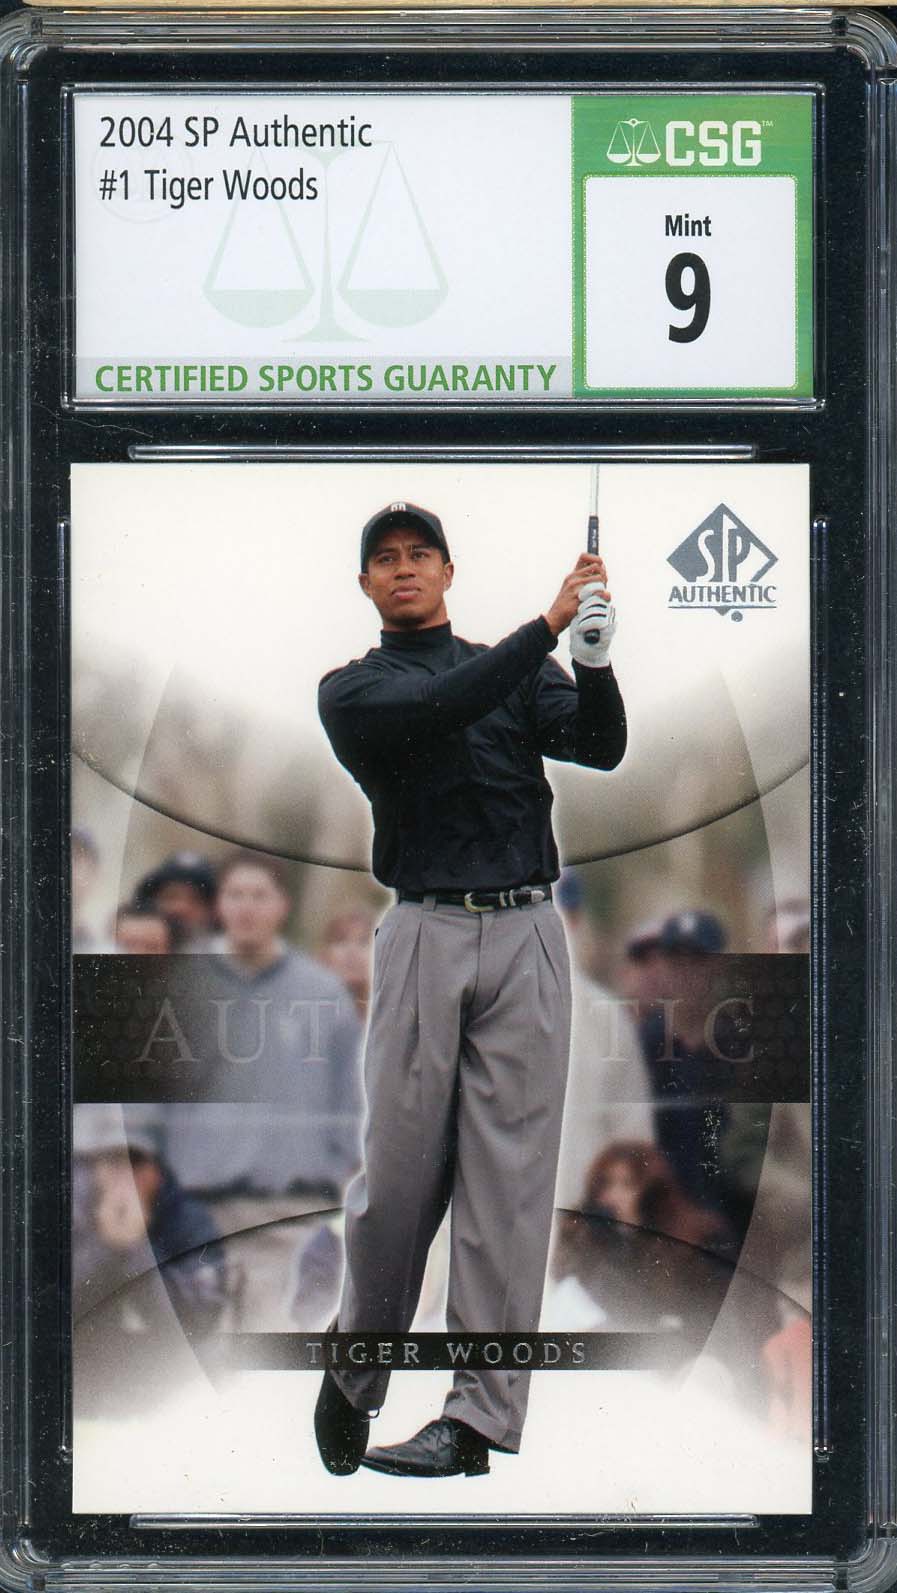 Tiger Woods 2004 SP Authentic Golf Card #1 Graded CSG 9-Powers Sports Memorabilia